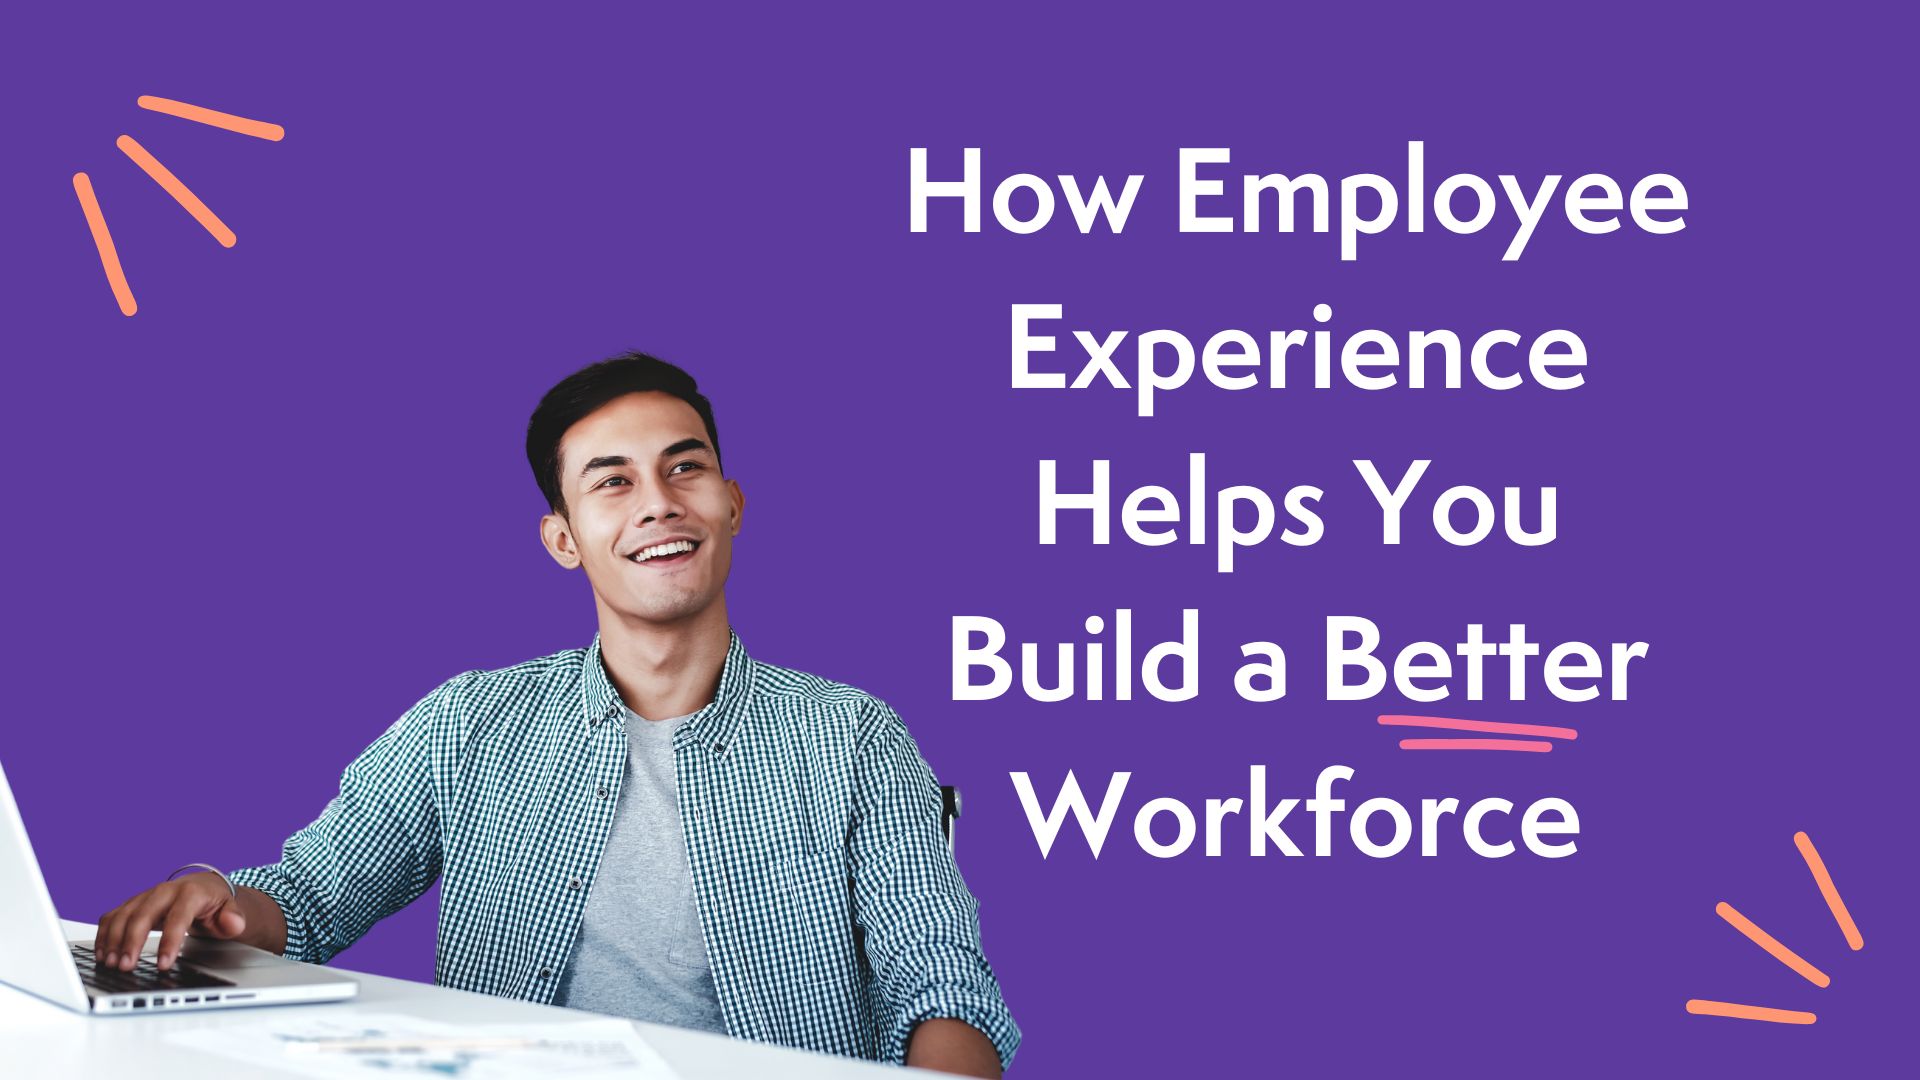 How Employee Experience Helps You Build a Better Workforce